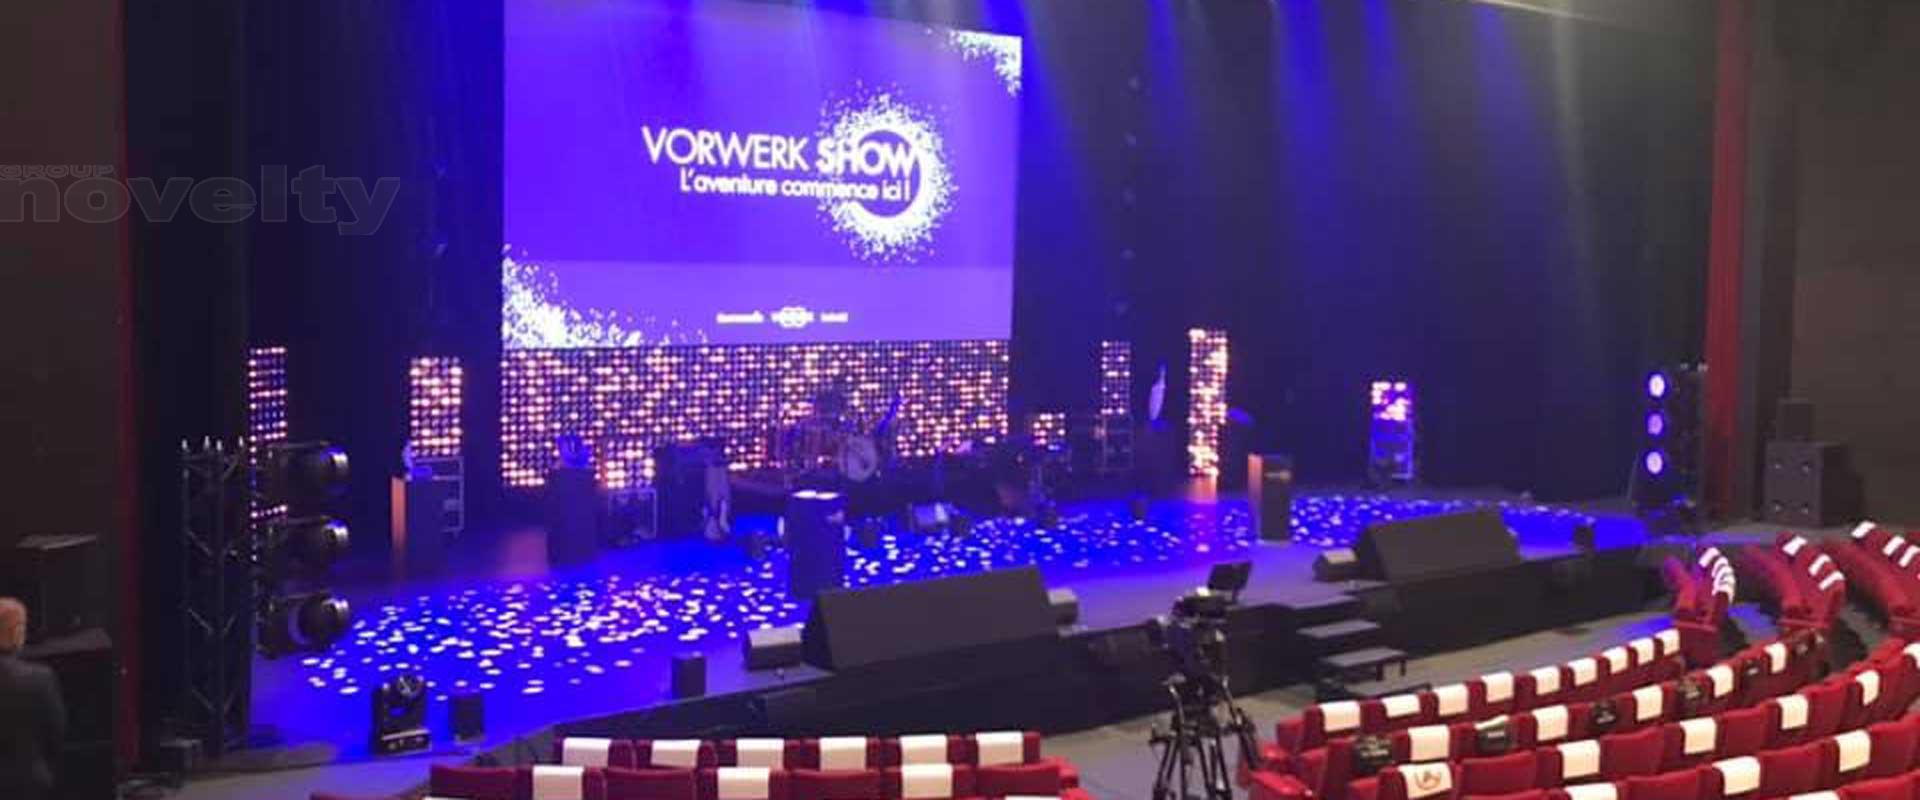 Visuel The VORWERK SHOW live streaming with NOVELTY Grand-Ouest